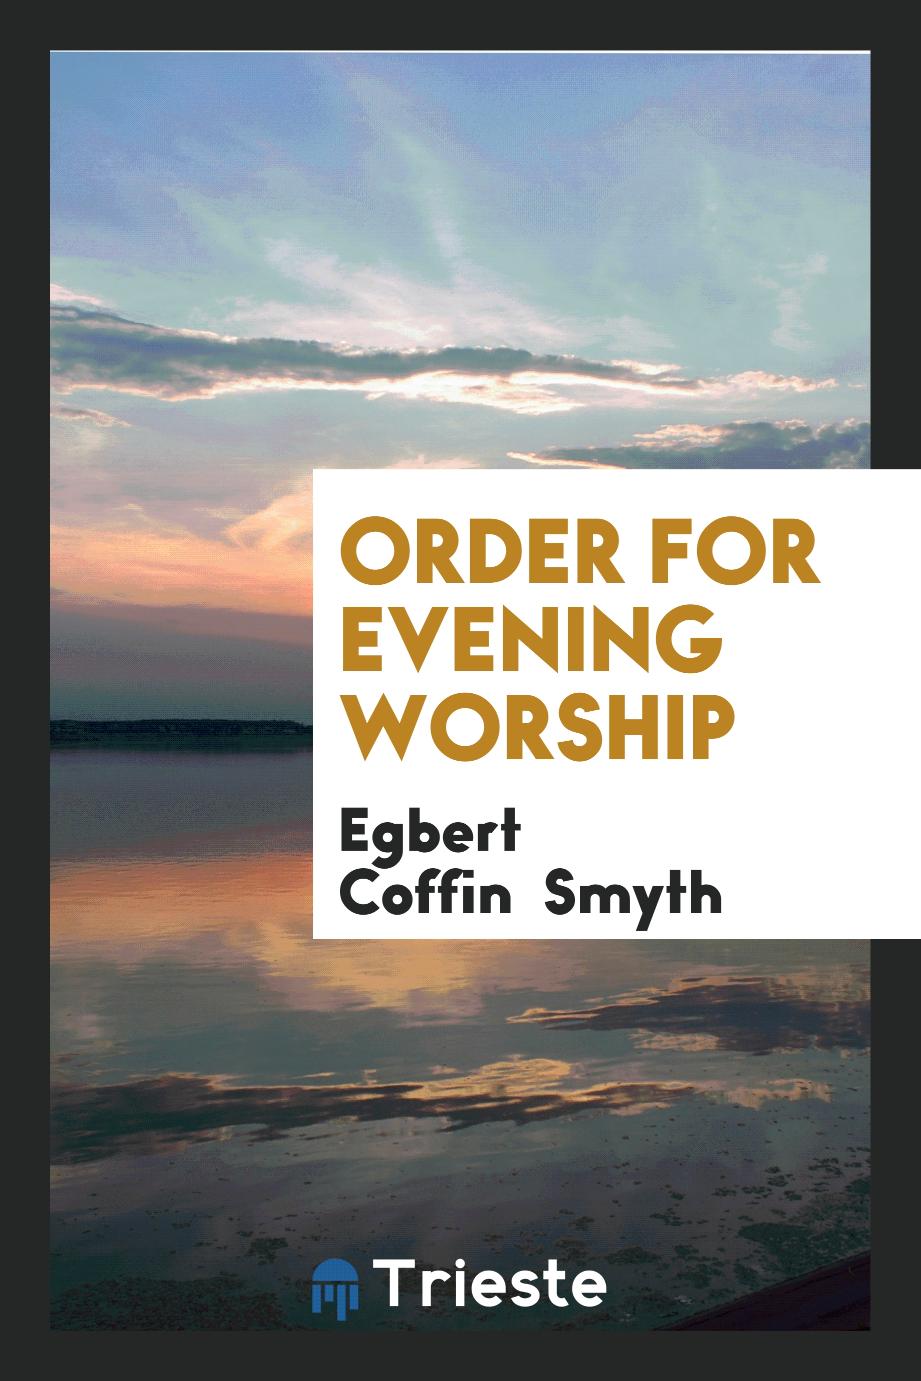 Order for evening worship